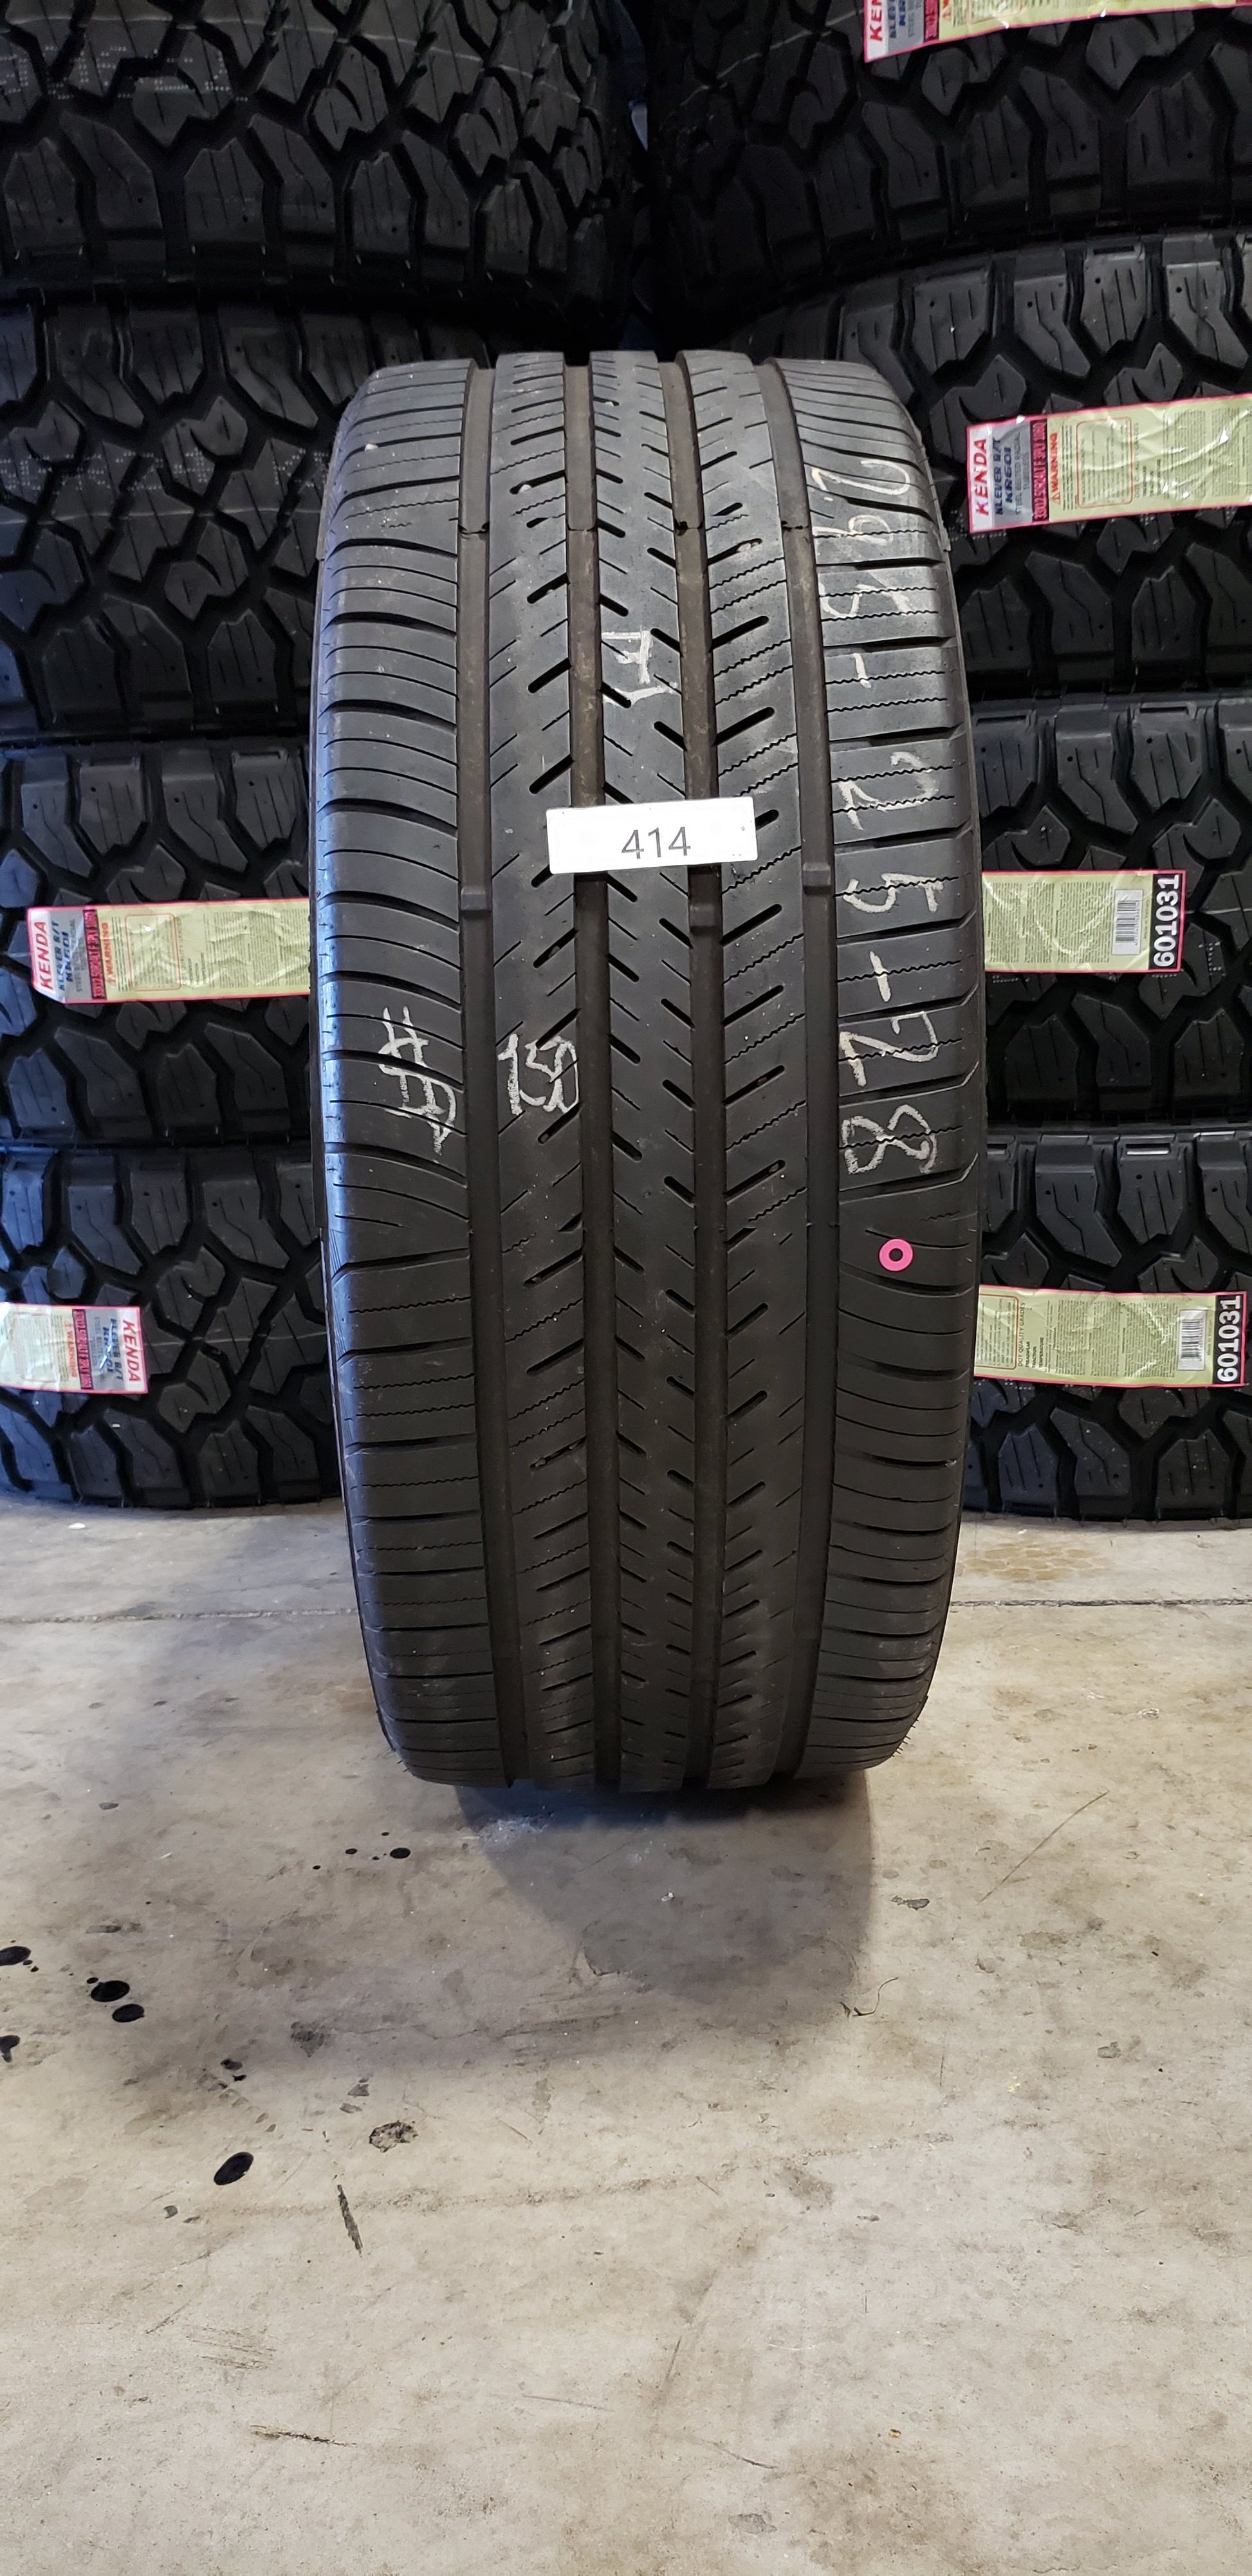 SINGLE 295/25R28 Atlas Force UHP 103 V XL - Used Tires